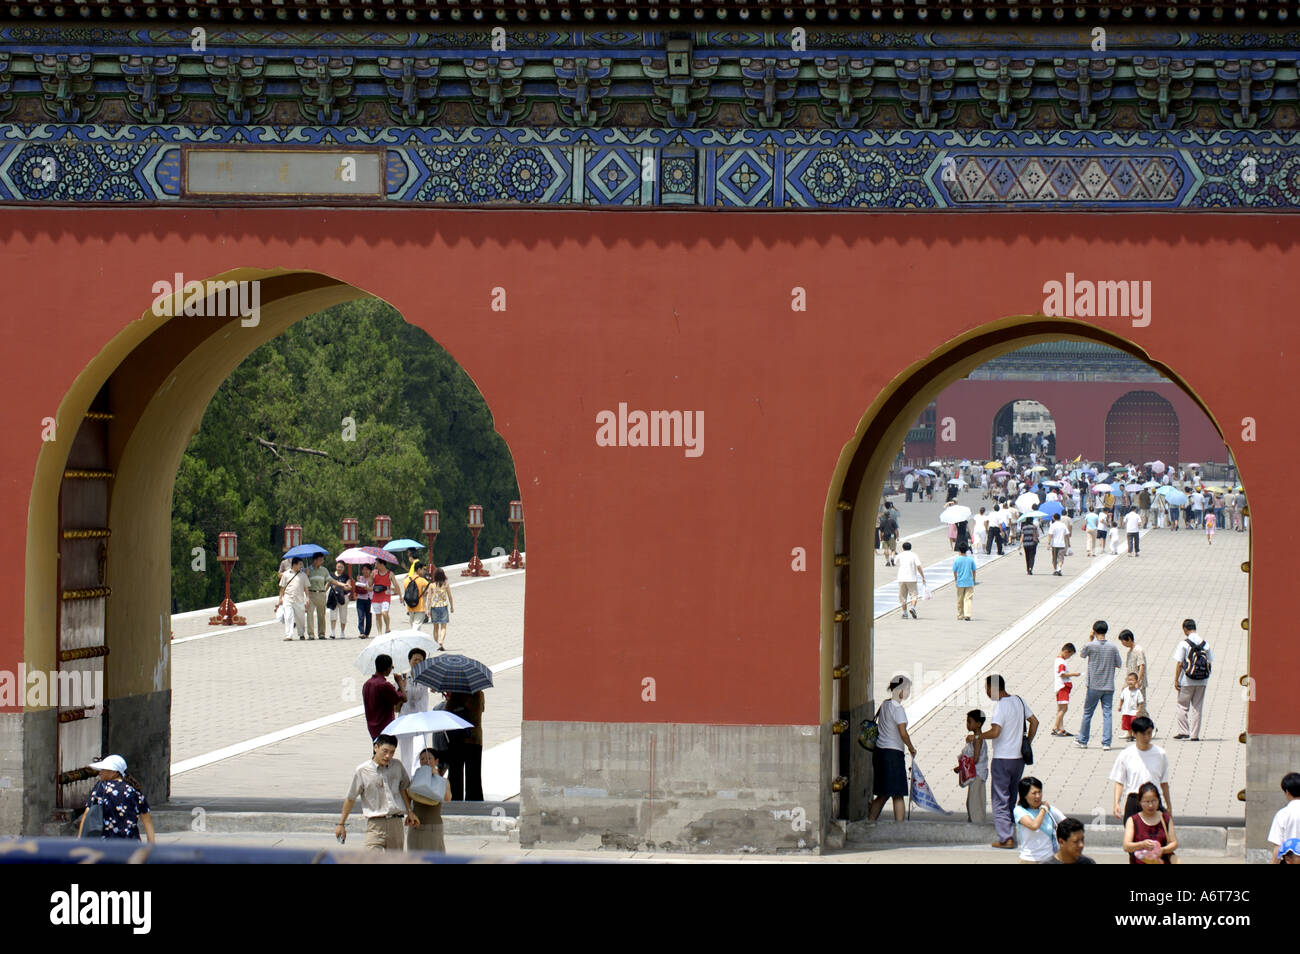 China Beijing The Temple Of Heaven Gate And Crowd At Tiantan Park On A Sunday Afternoon Stock Photo